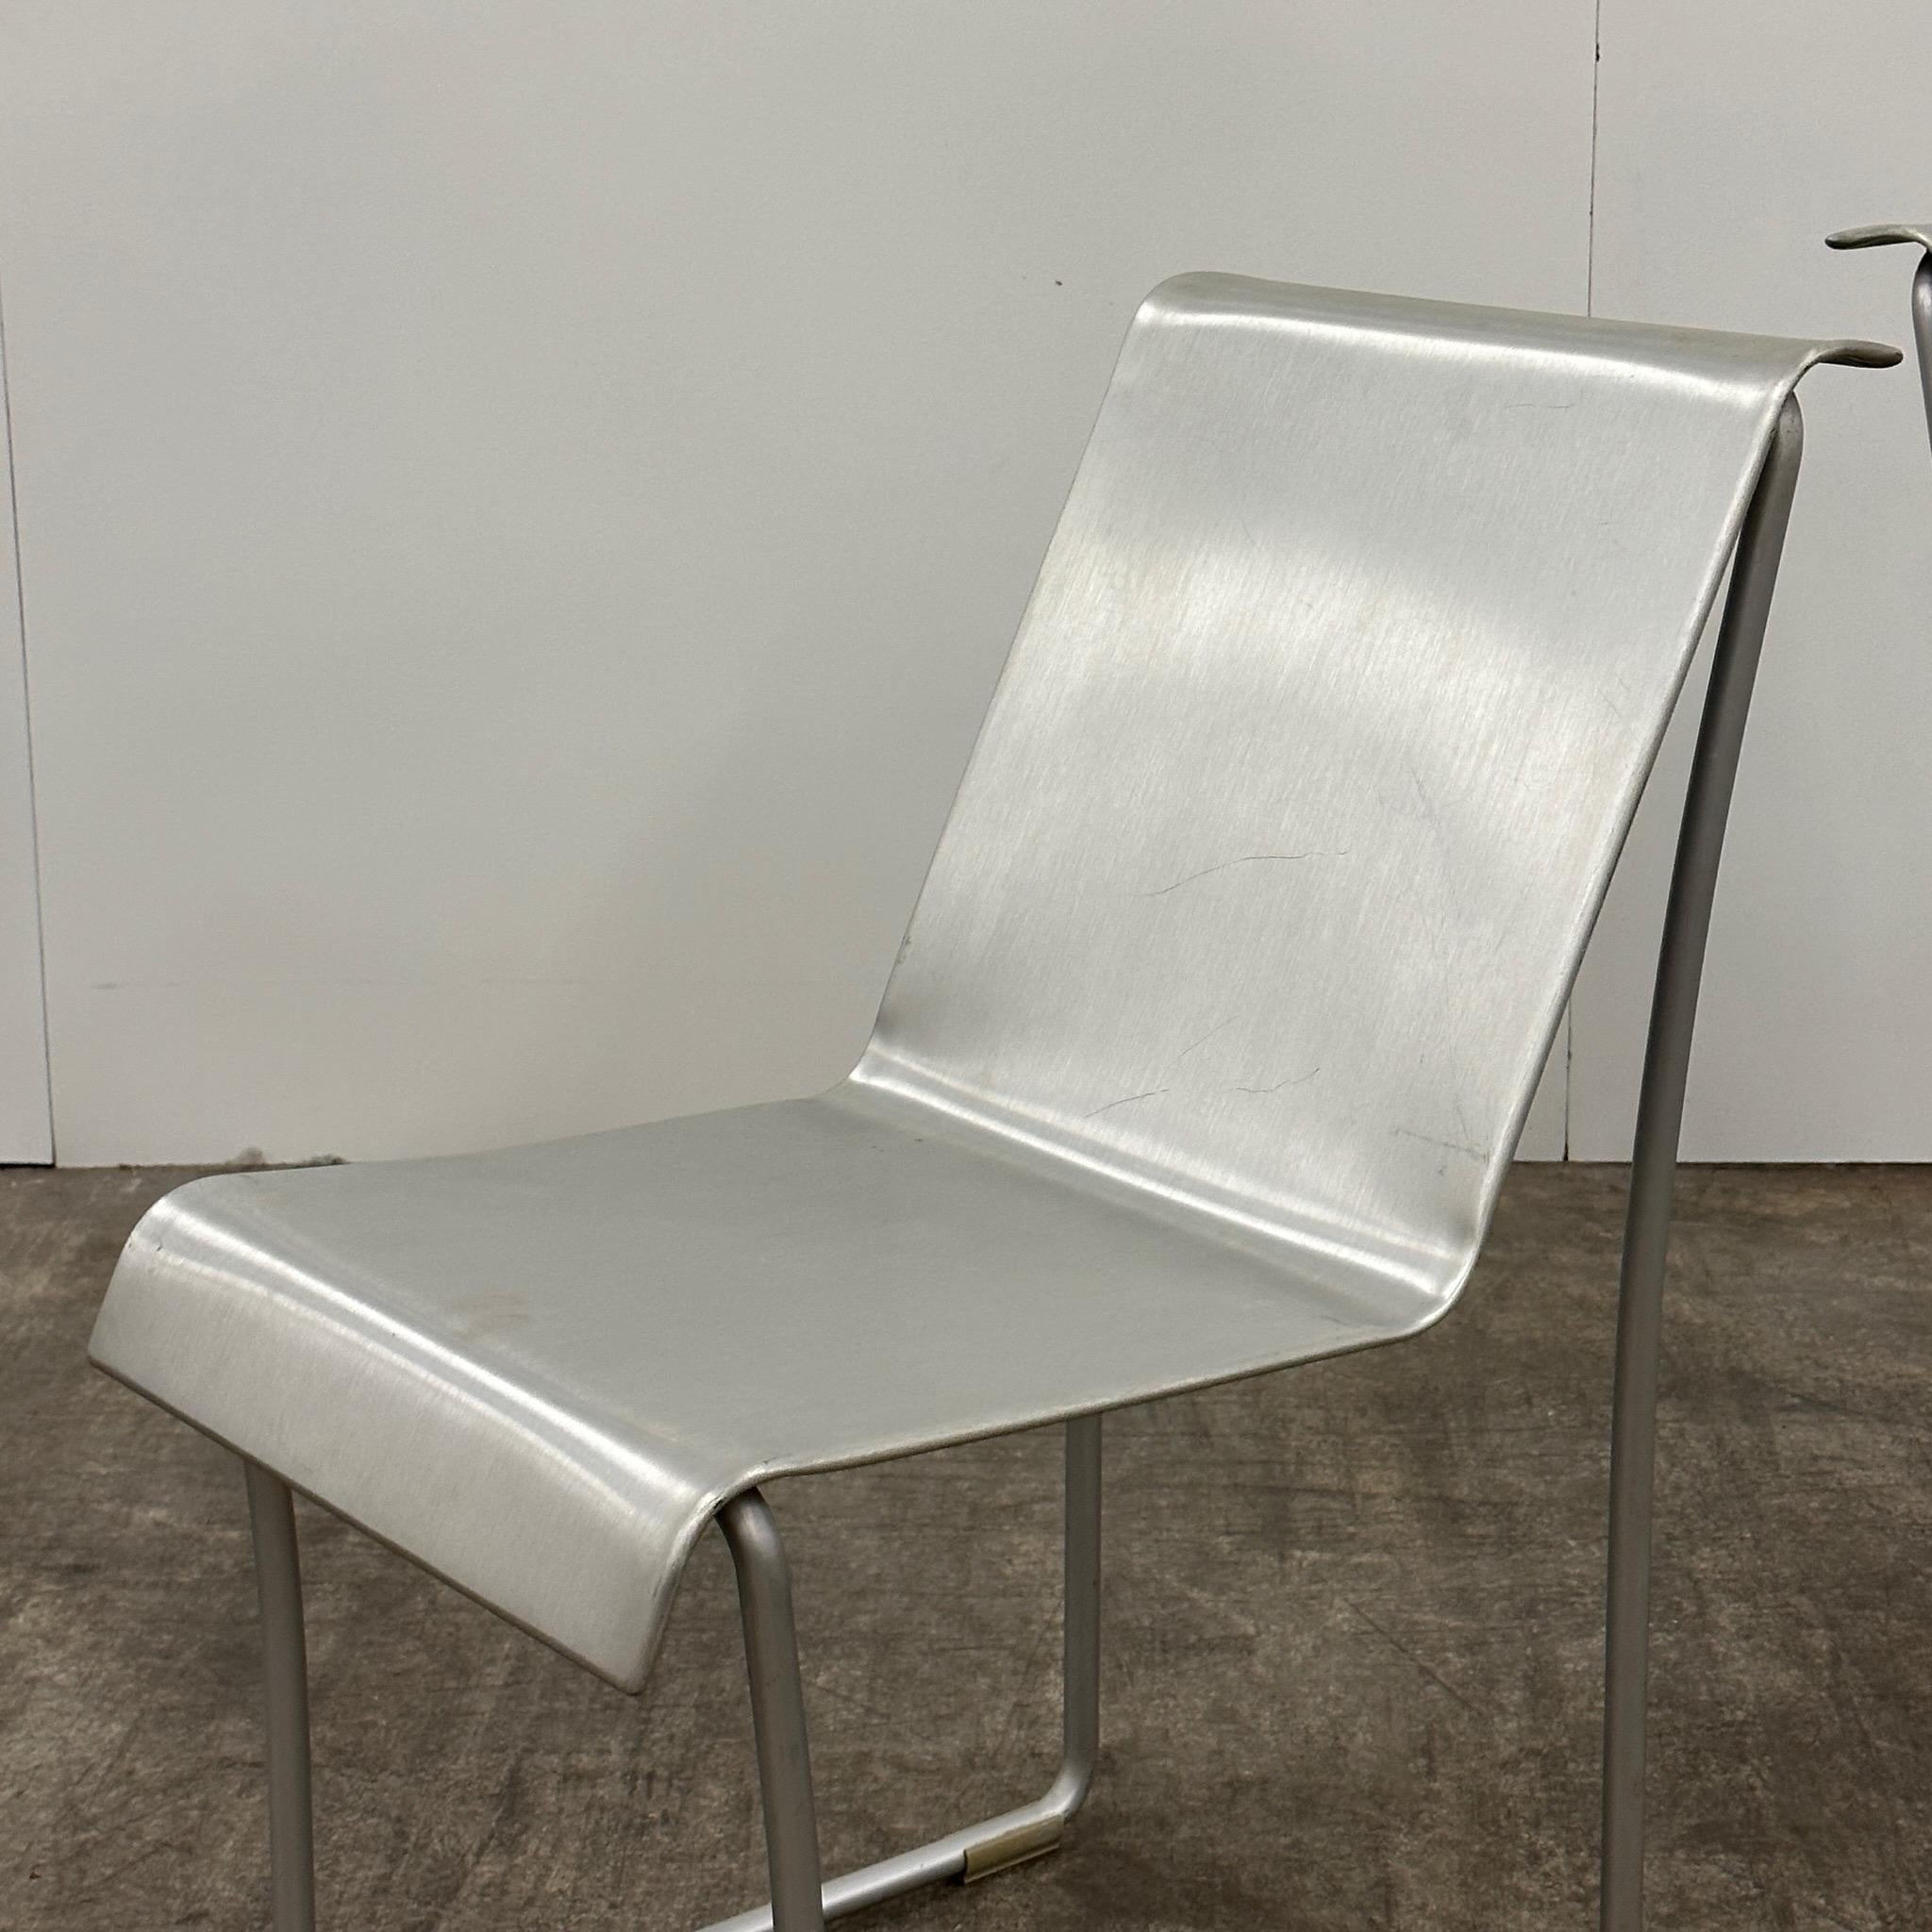 c. 2000s. Designed by Frank Gehry for Emeco. Full aluminum construction.

Price is for the set. Contact us if you'd like to purchase a single item.